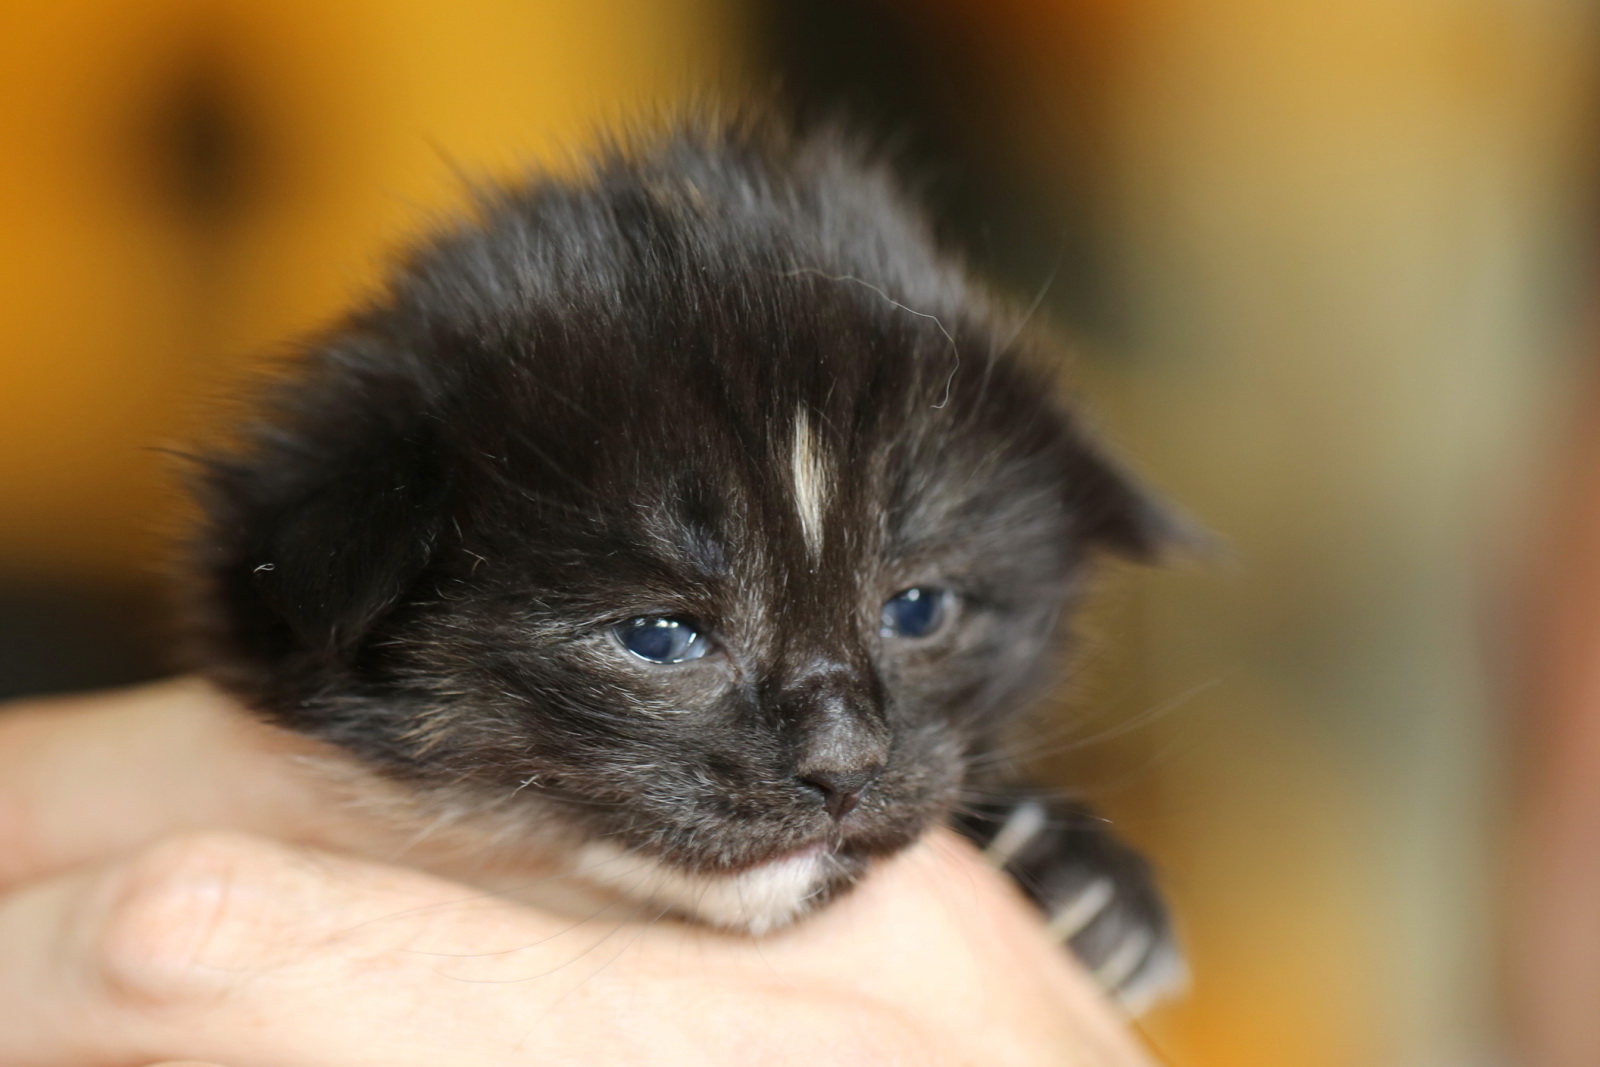 a small black kitten with very blue eyes held by someone